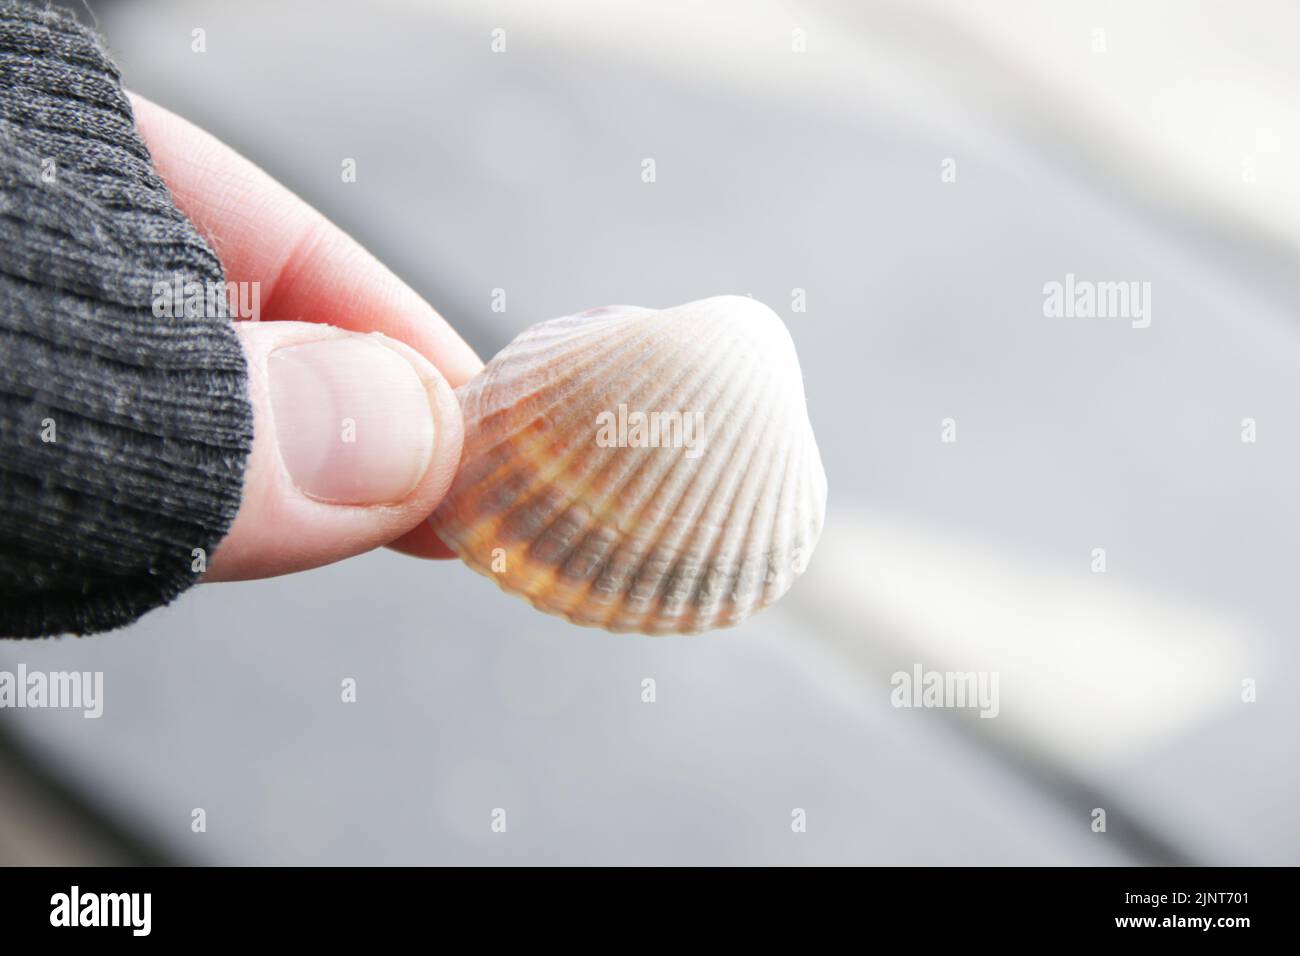 Hand holding a seashell on a blurred background Stock Photo